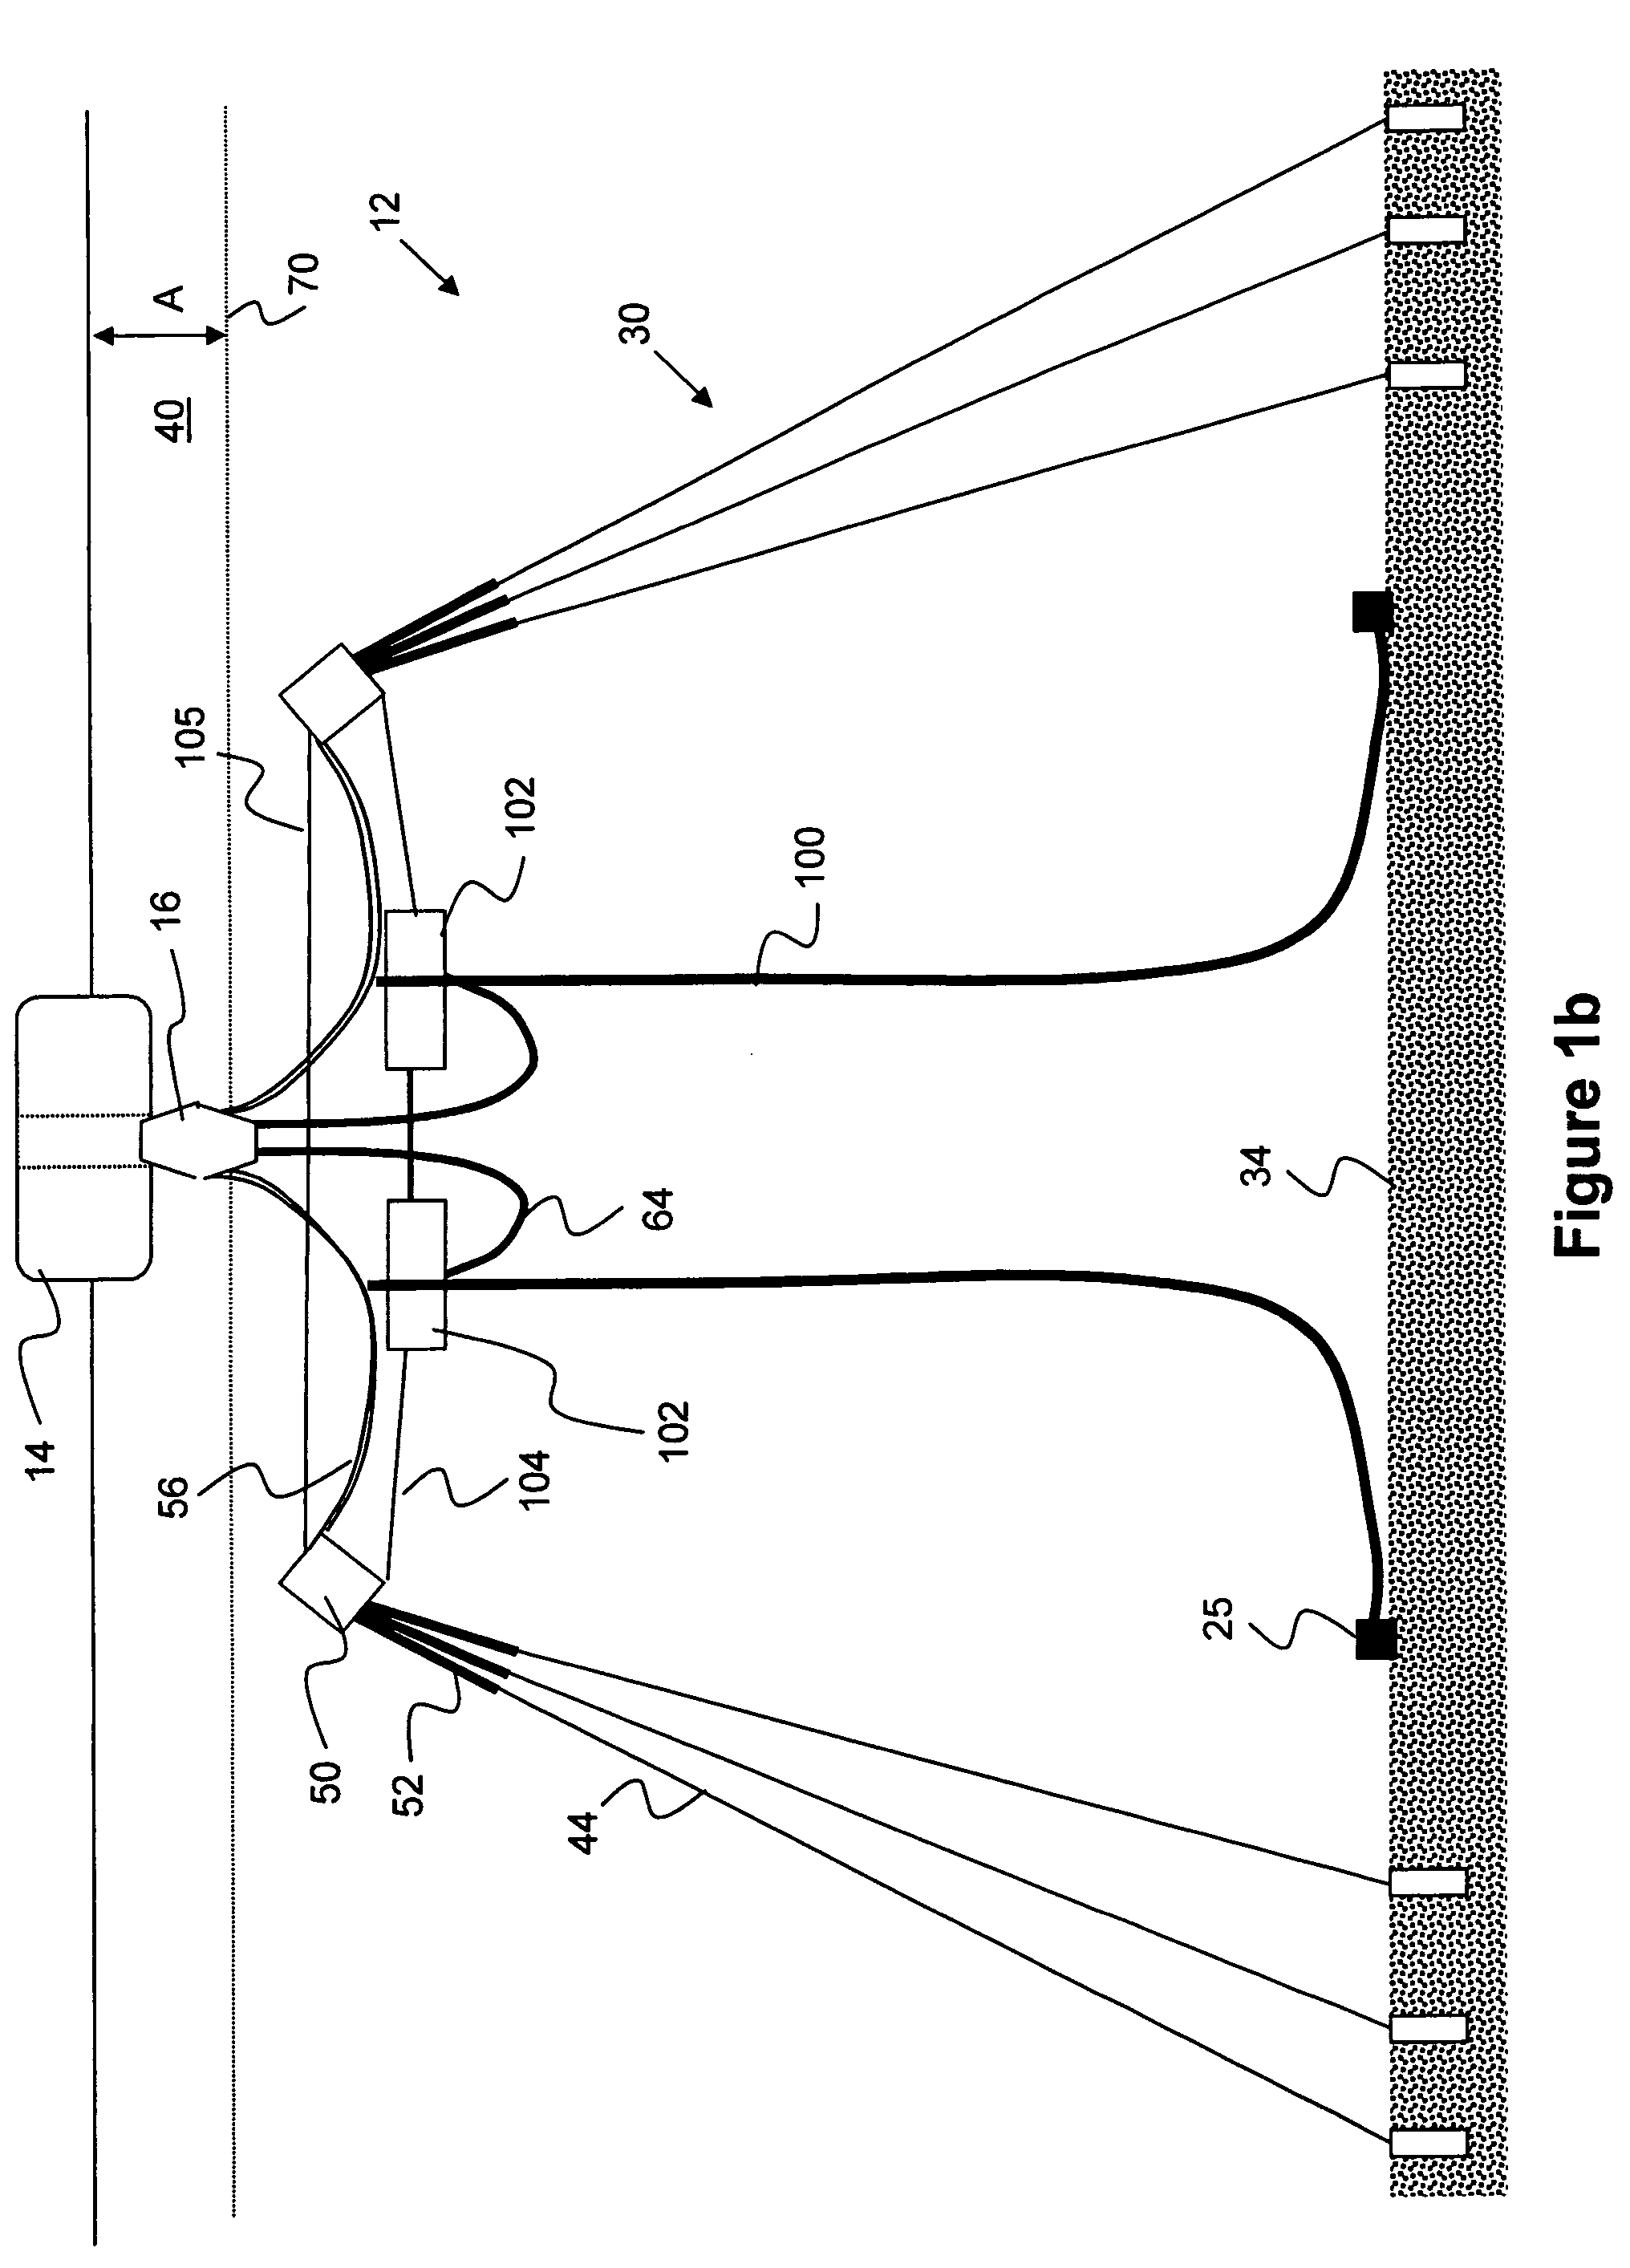 Disconnectable riser-mooring system